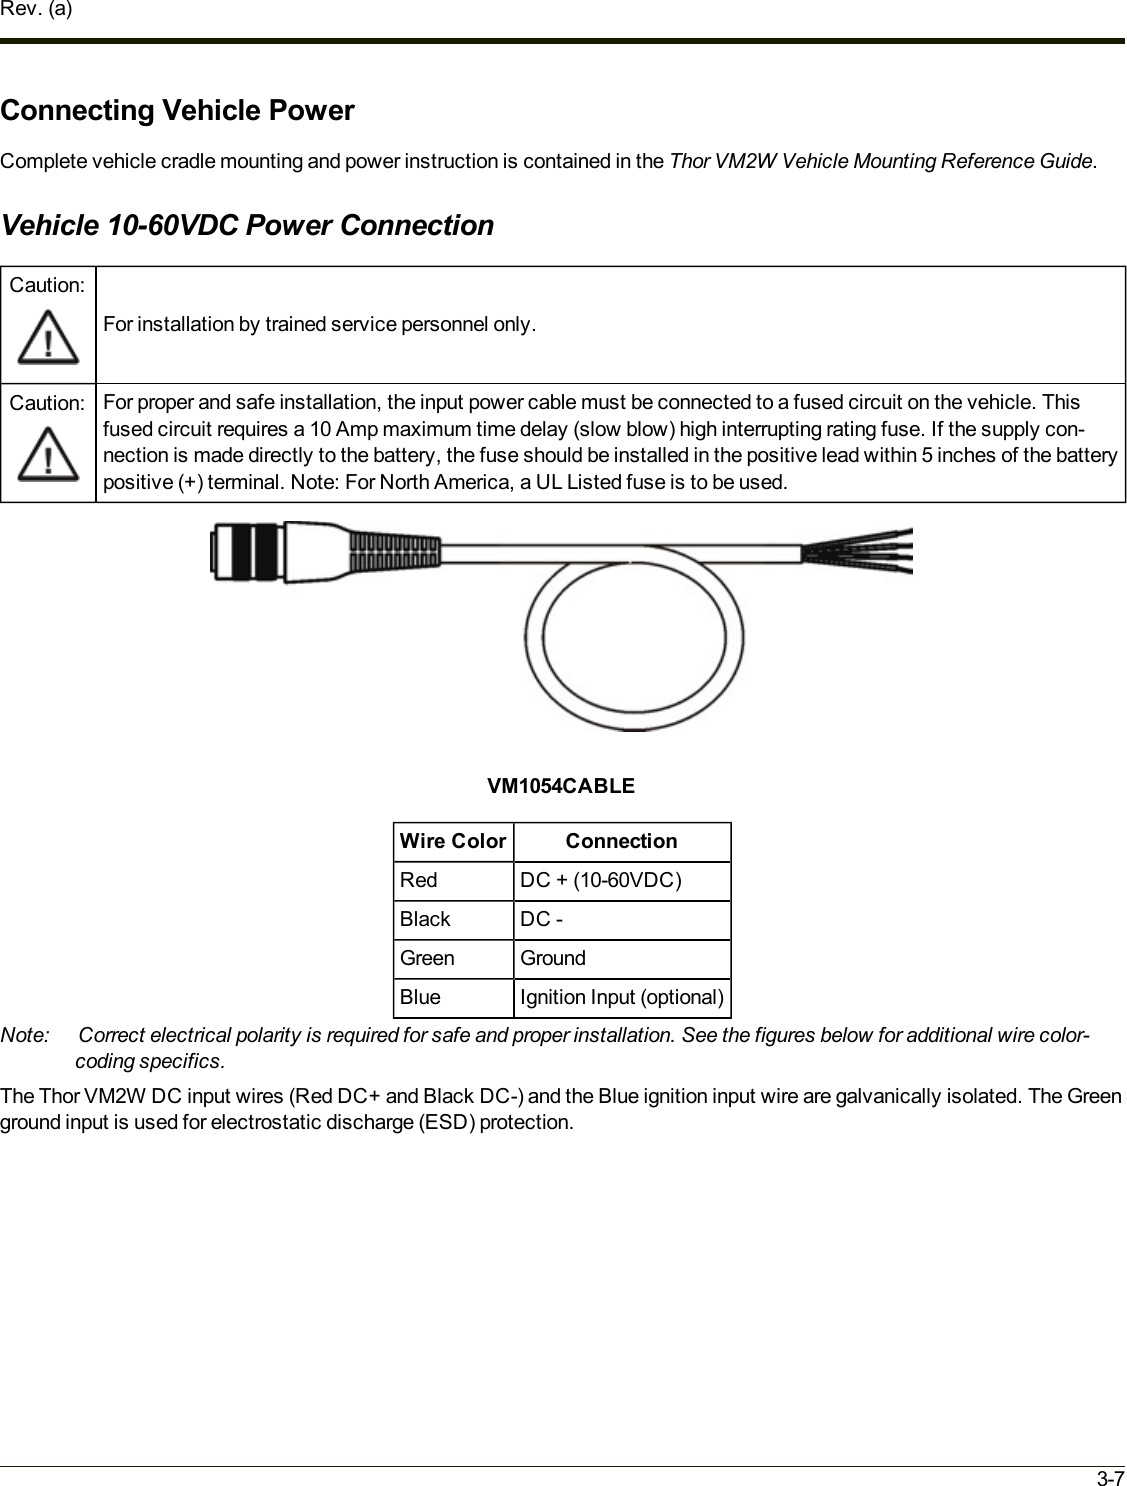 Rev. (a)Connecting Vehicle PowerComplete vehicle cradle mounting and power instruction is contained in the Thor VM2W Vehicle Mounting Reference Guide.Vehicle 10-60VDC Power ConnectionCaution:For installation by trained service personnel only.Caution: For proper and safe installation, the input power cable must be connected to a fused circuit on the vehicle. Thisfused circuit requires a 10 Amp maximum time delay (slow blow) high interrupting rating fuse. If the supply con-nection is made directly to the battery, the fuse should be installed in the positive lead within 5 inches of the batterypositive (+) terminal. Note: For North America, a UL Listed fuse is to be used.VM1054CABLEWire Color ConnectionRed DC + (10-60VDC)Black DC -Green GroundBlue Ignition Input (optional)Note: Correct electrical polarity is required for safe and proper installation. See the figures below for additional wire color-coding specifics.The Thor VM2W DC input wires (Red DC+ and Black DC-) and the Blue ignition input wire are galvanically isolated. The Greenground input is used for electrostatic discharge (ESD) protection.3-7